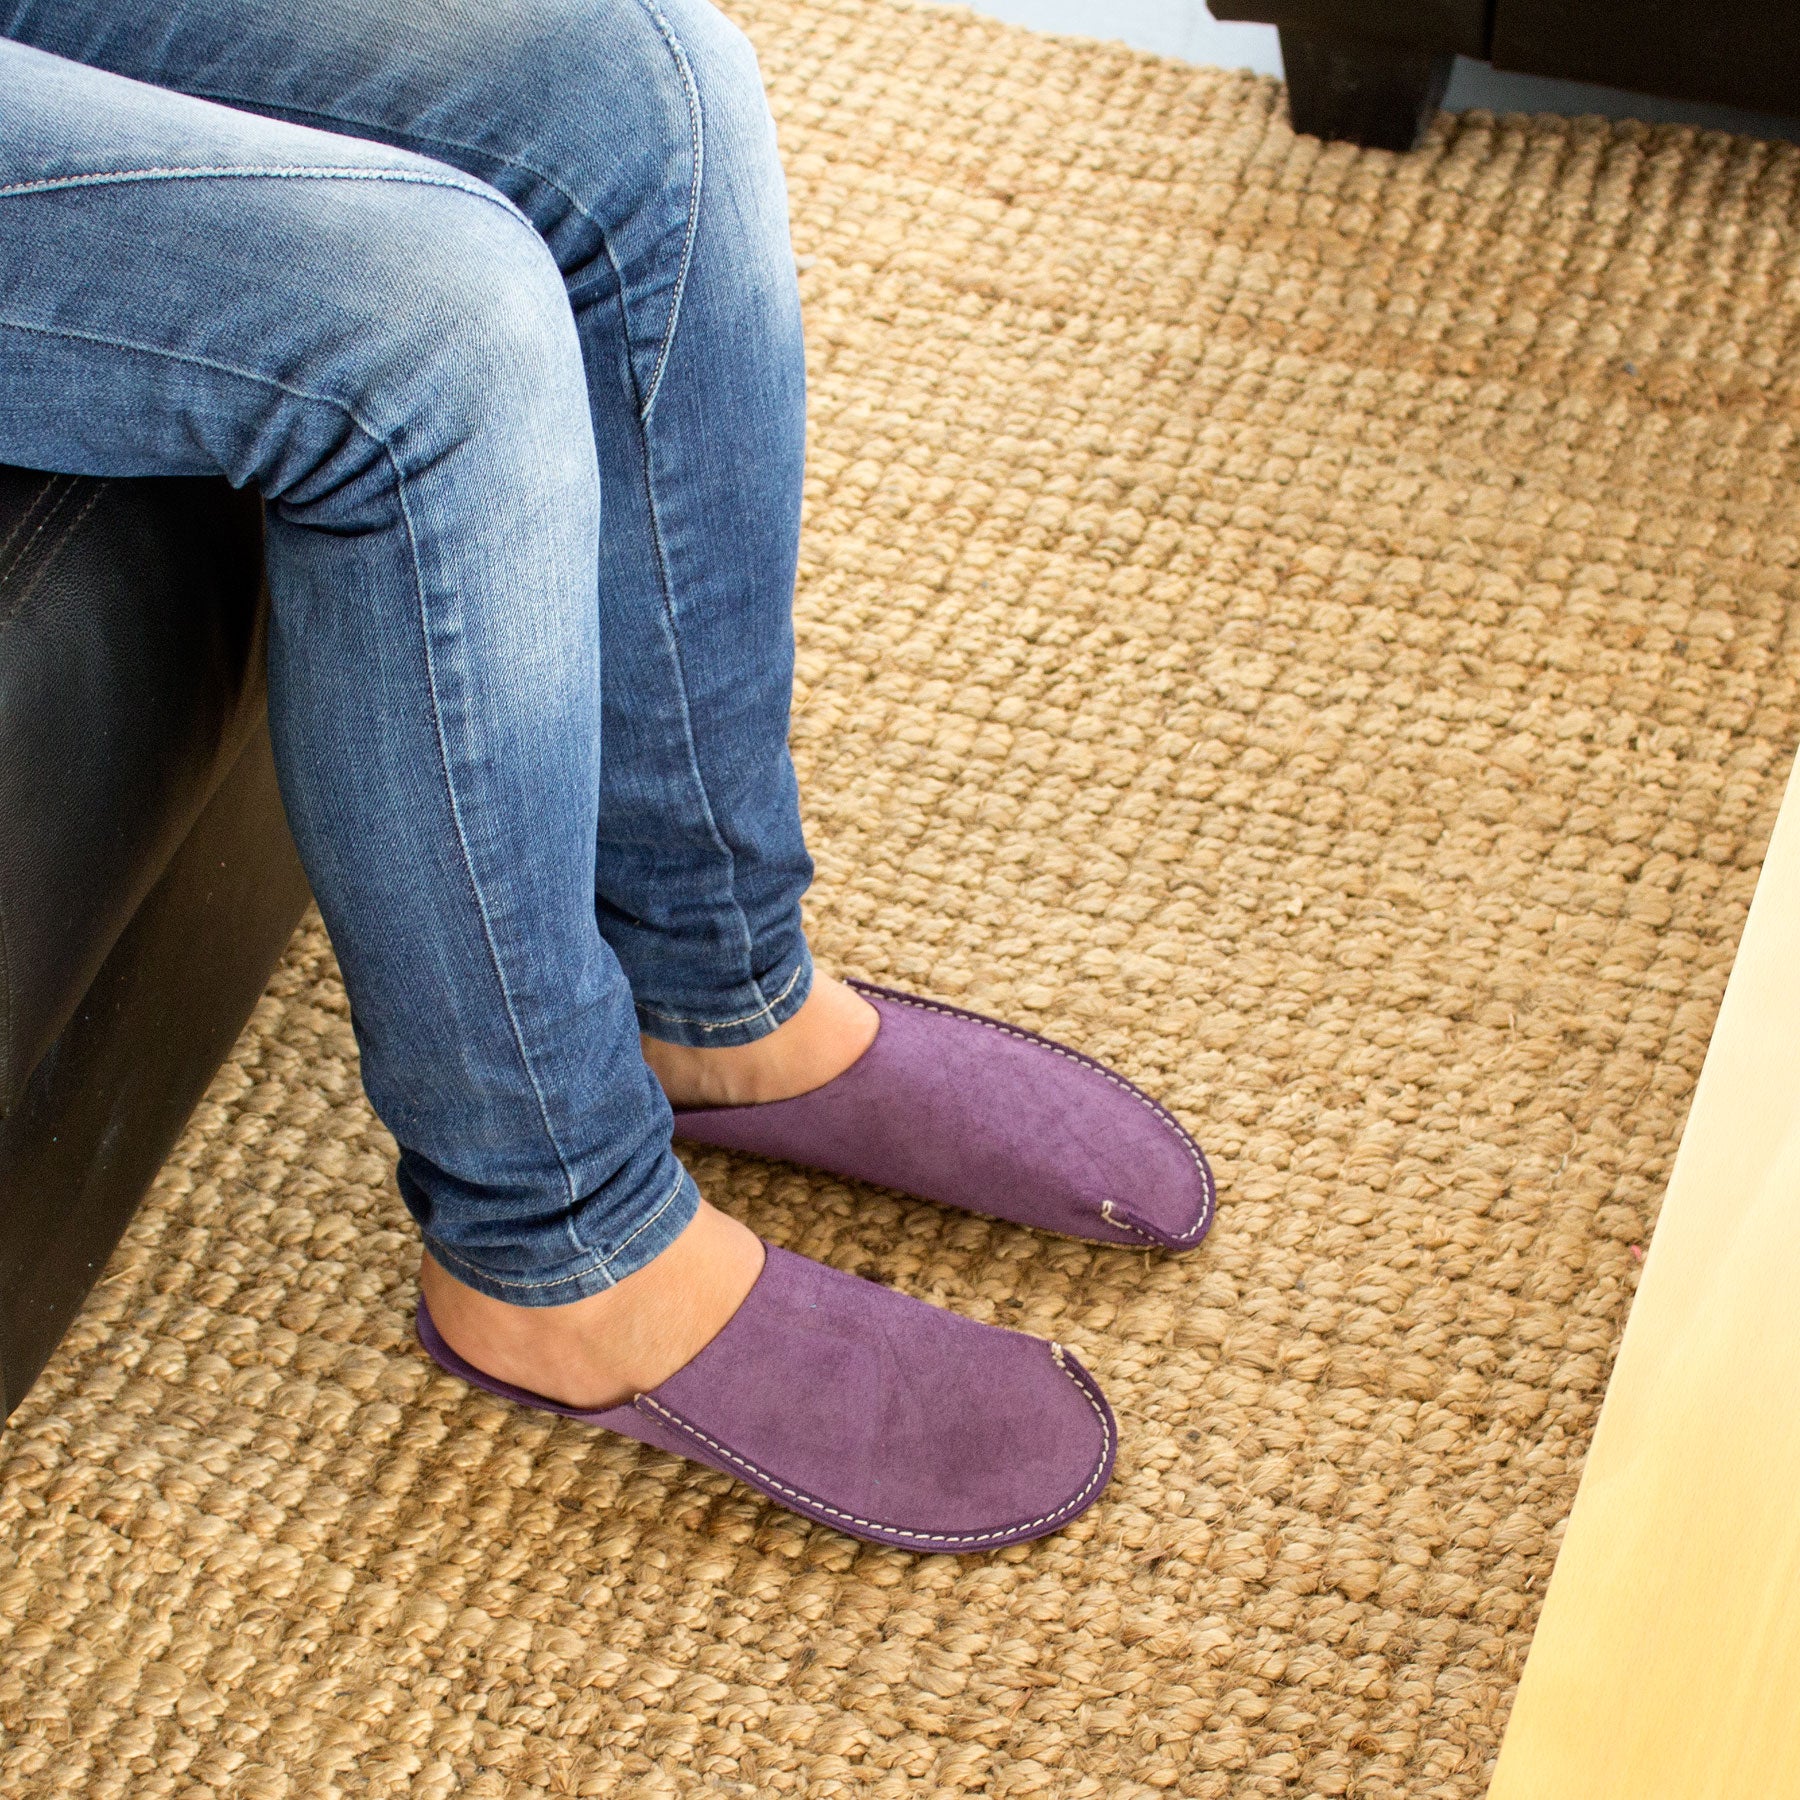 Violet CP Slippers Minimalist home shoes for man and woman at home